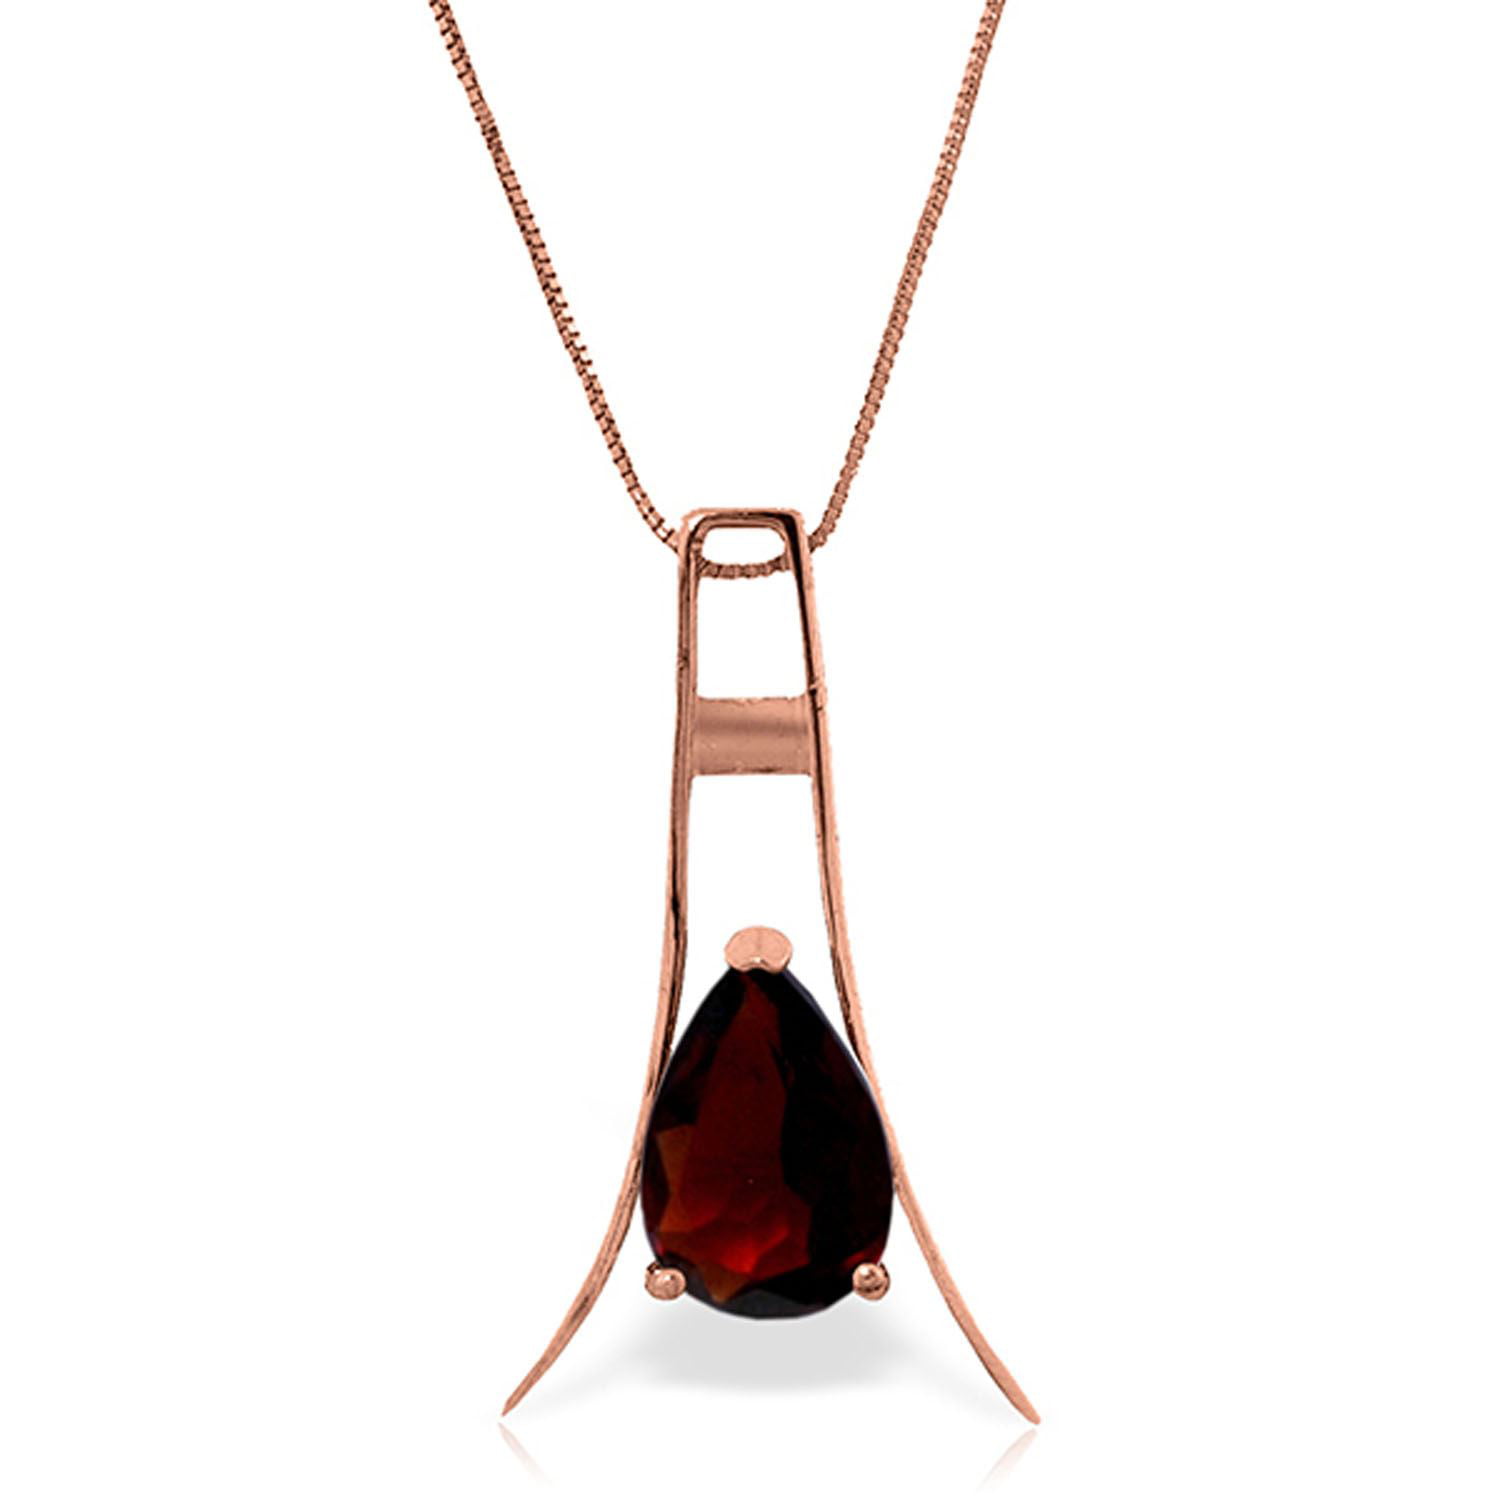 ALARRI 14K Solid Rose Gold Necklace w/ Natural Garnets with 24 Inch Chain Length